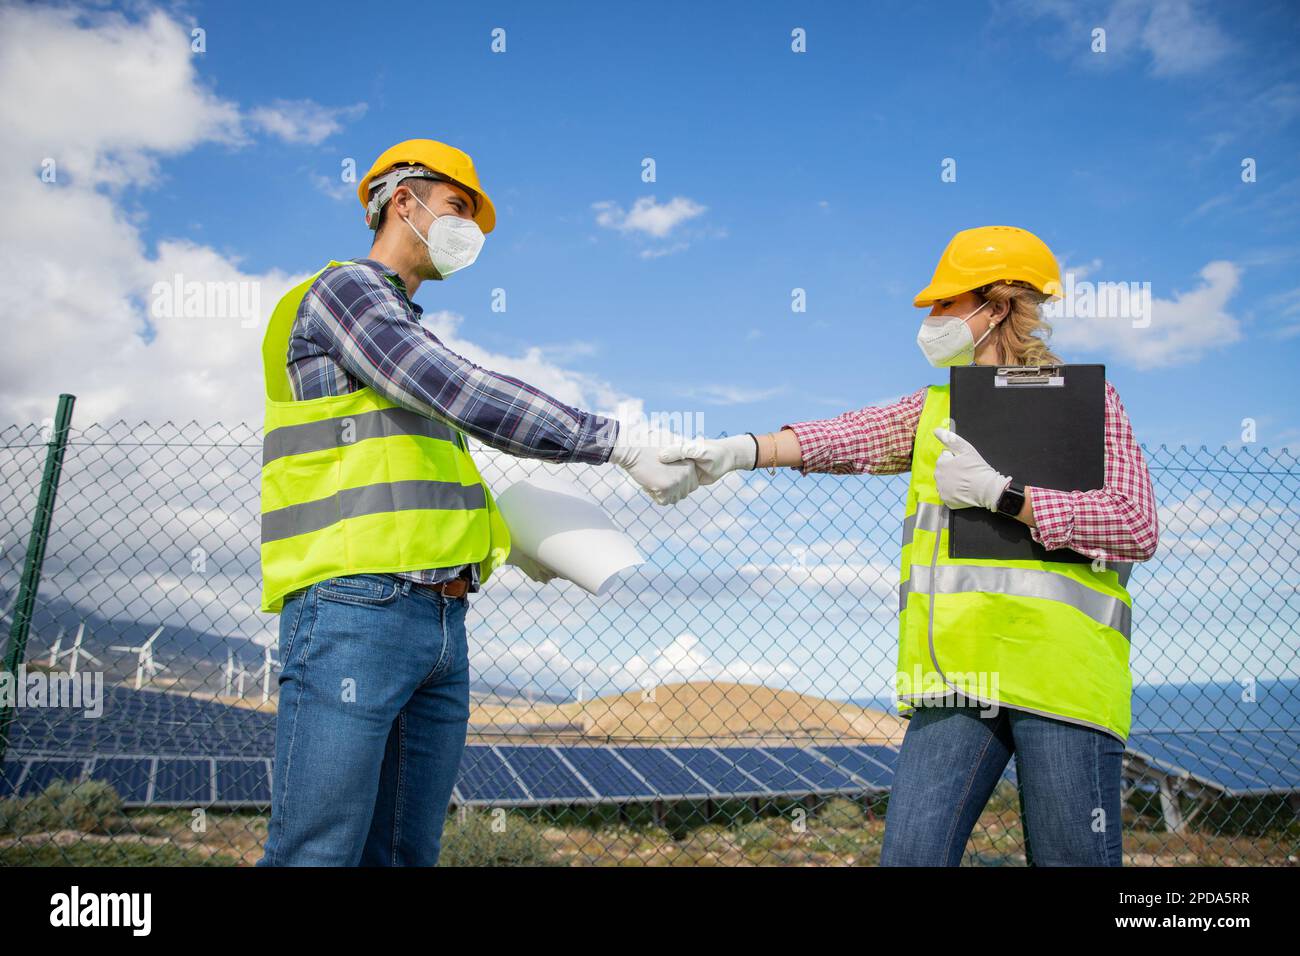 Two coworkers shaking hands at work in a solar power plant, concept of done deal and agreement found Stock Photo